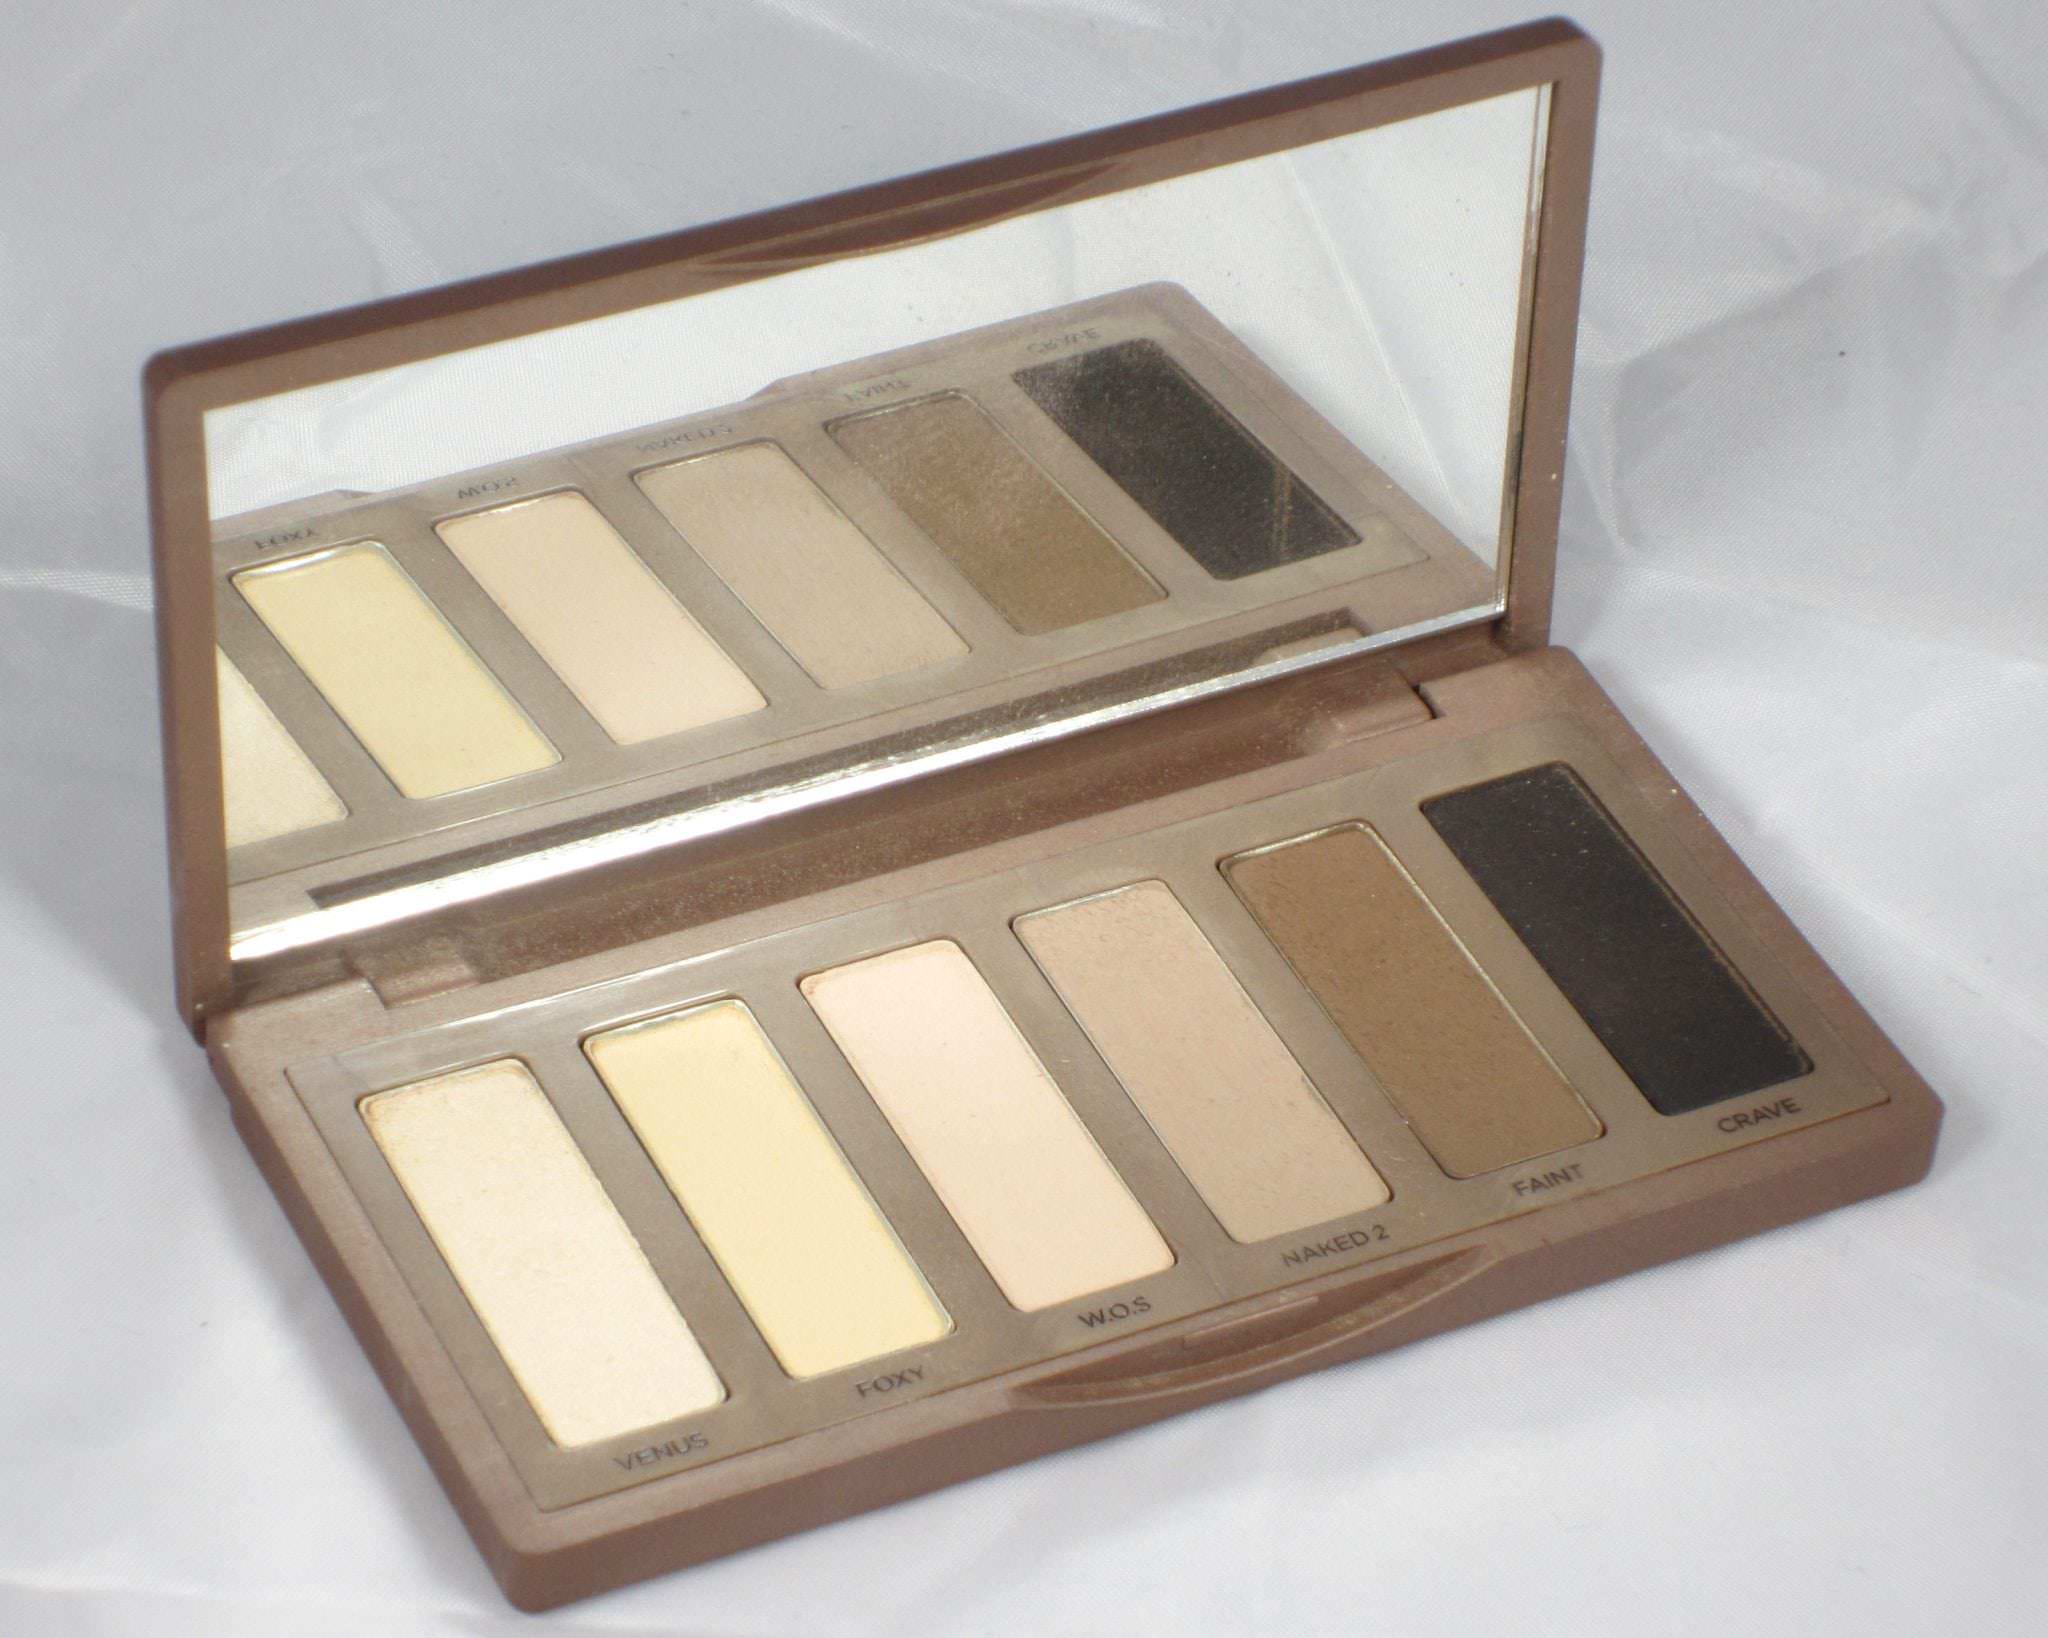 Swatches / Review: Urban Decay Naked Basics